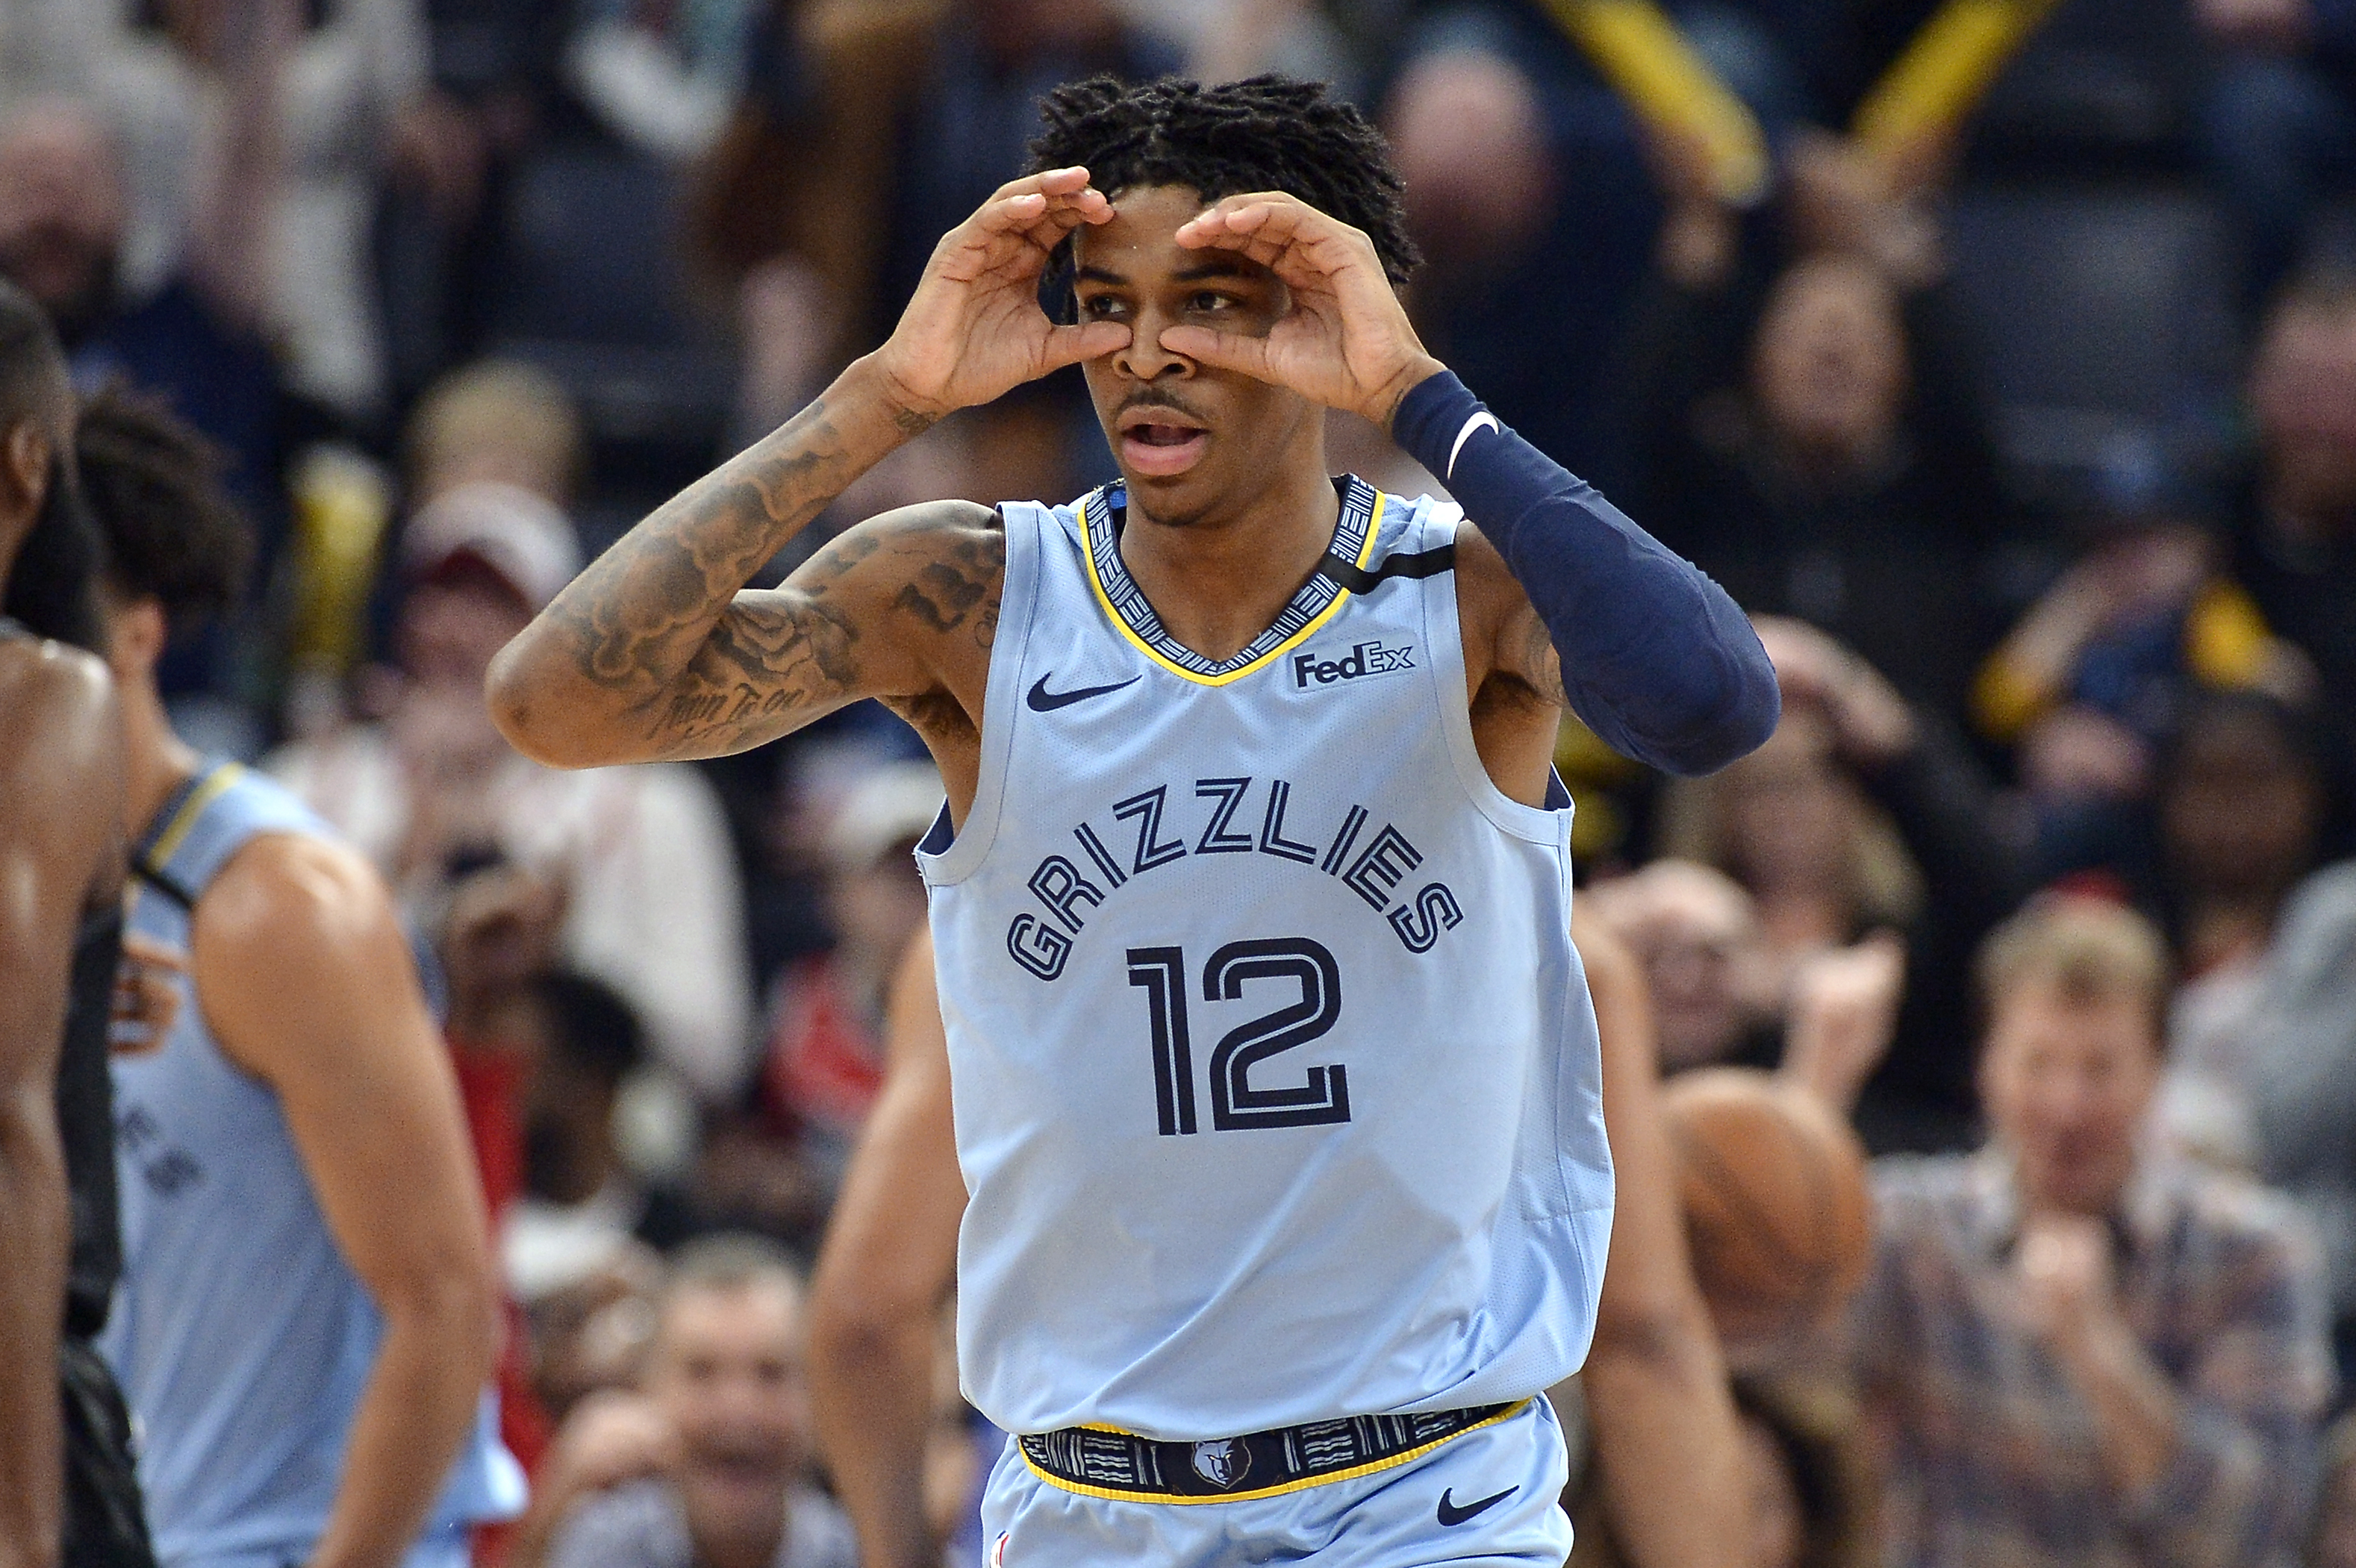 Morant leads Grizzlies past Rockets 121-110 for 6th straight